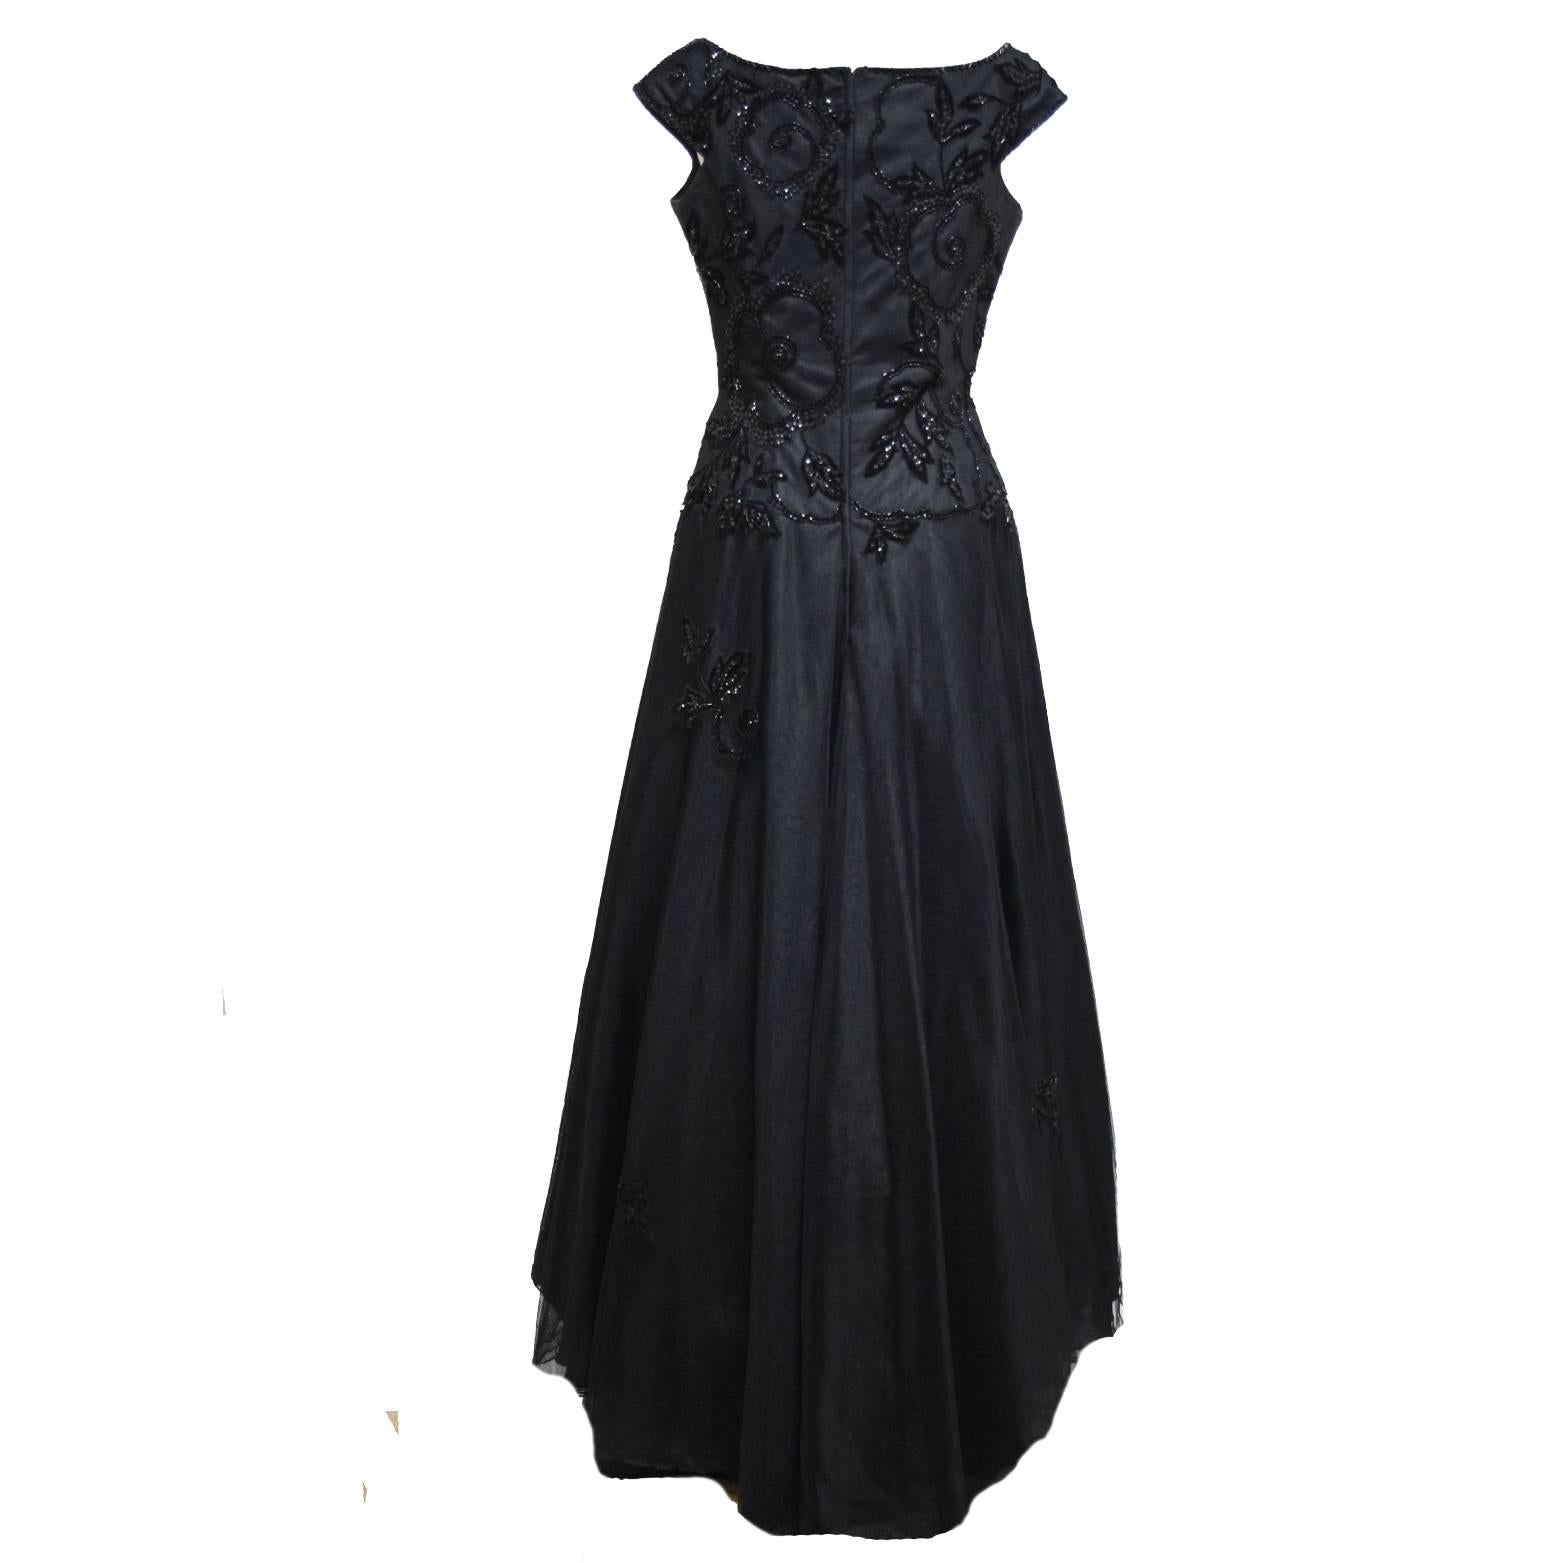 Liancarlo Black Evening Gown, Made with Three Layers of Black Tulle Adorned with Hand Sequin, Beading and Embroidered Vine of Roses on Bodice, Cap Sleeeve, Drop Waistline, Full Skirt Lined in Silk, Swiss Tulle Applied to the skirt as Fourth Layer